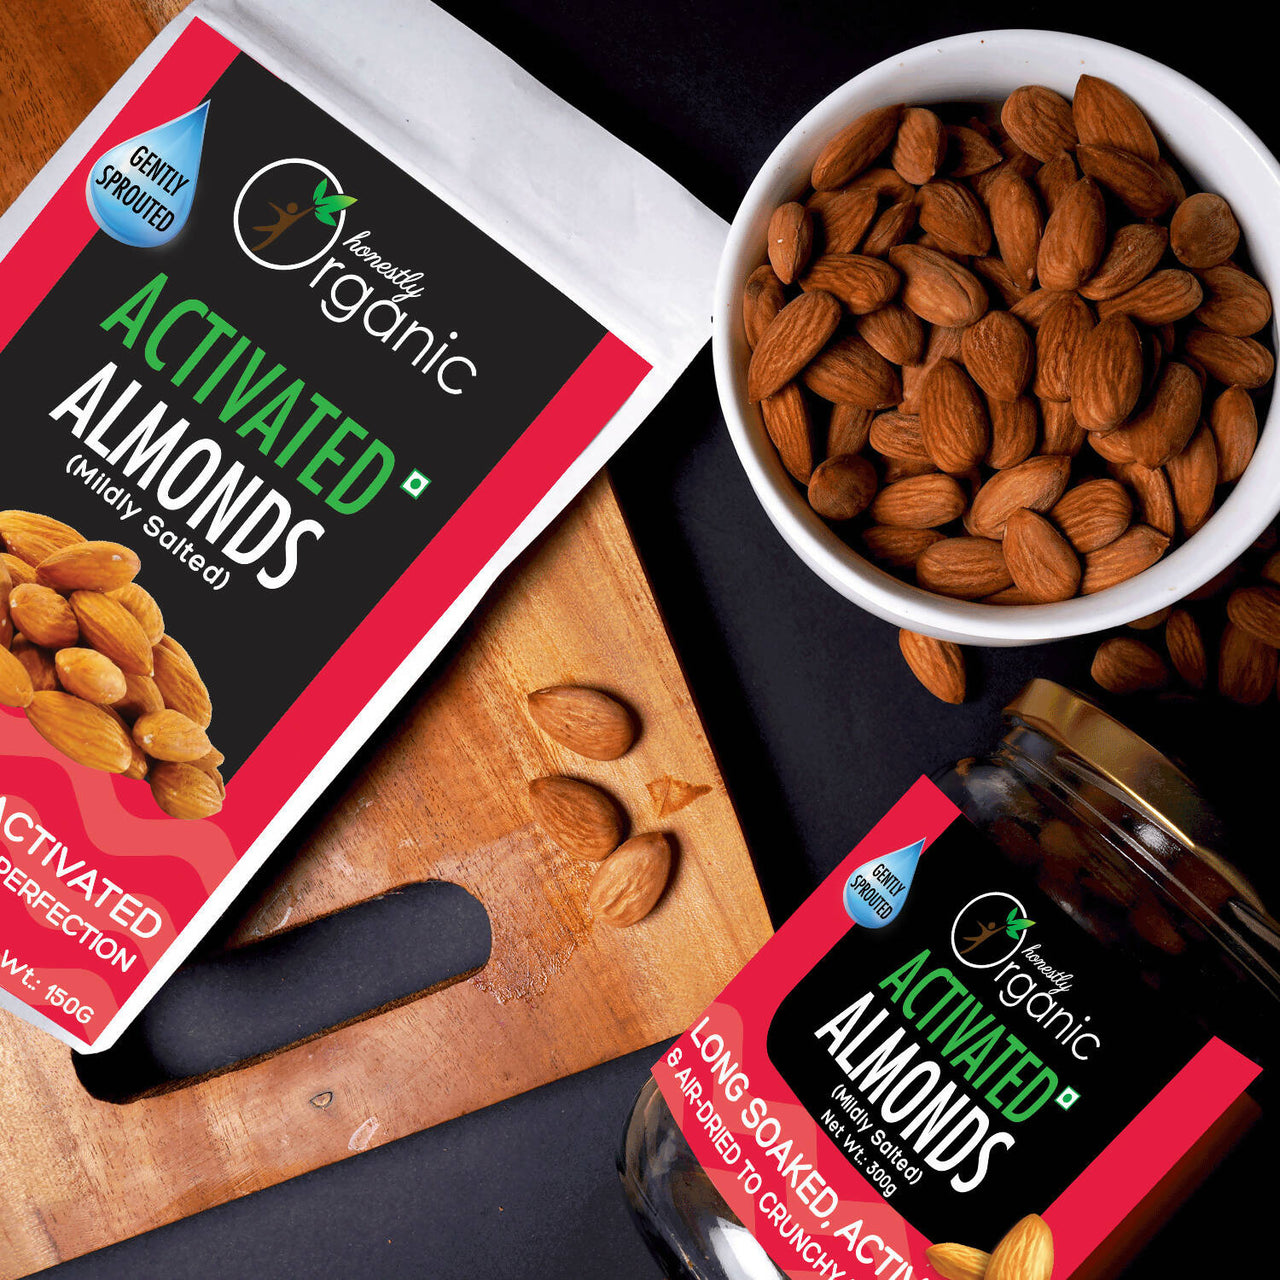 D-Alive Honestly Organic Activated Almonds - Distacart